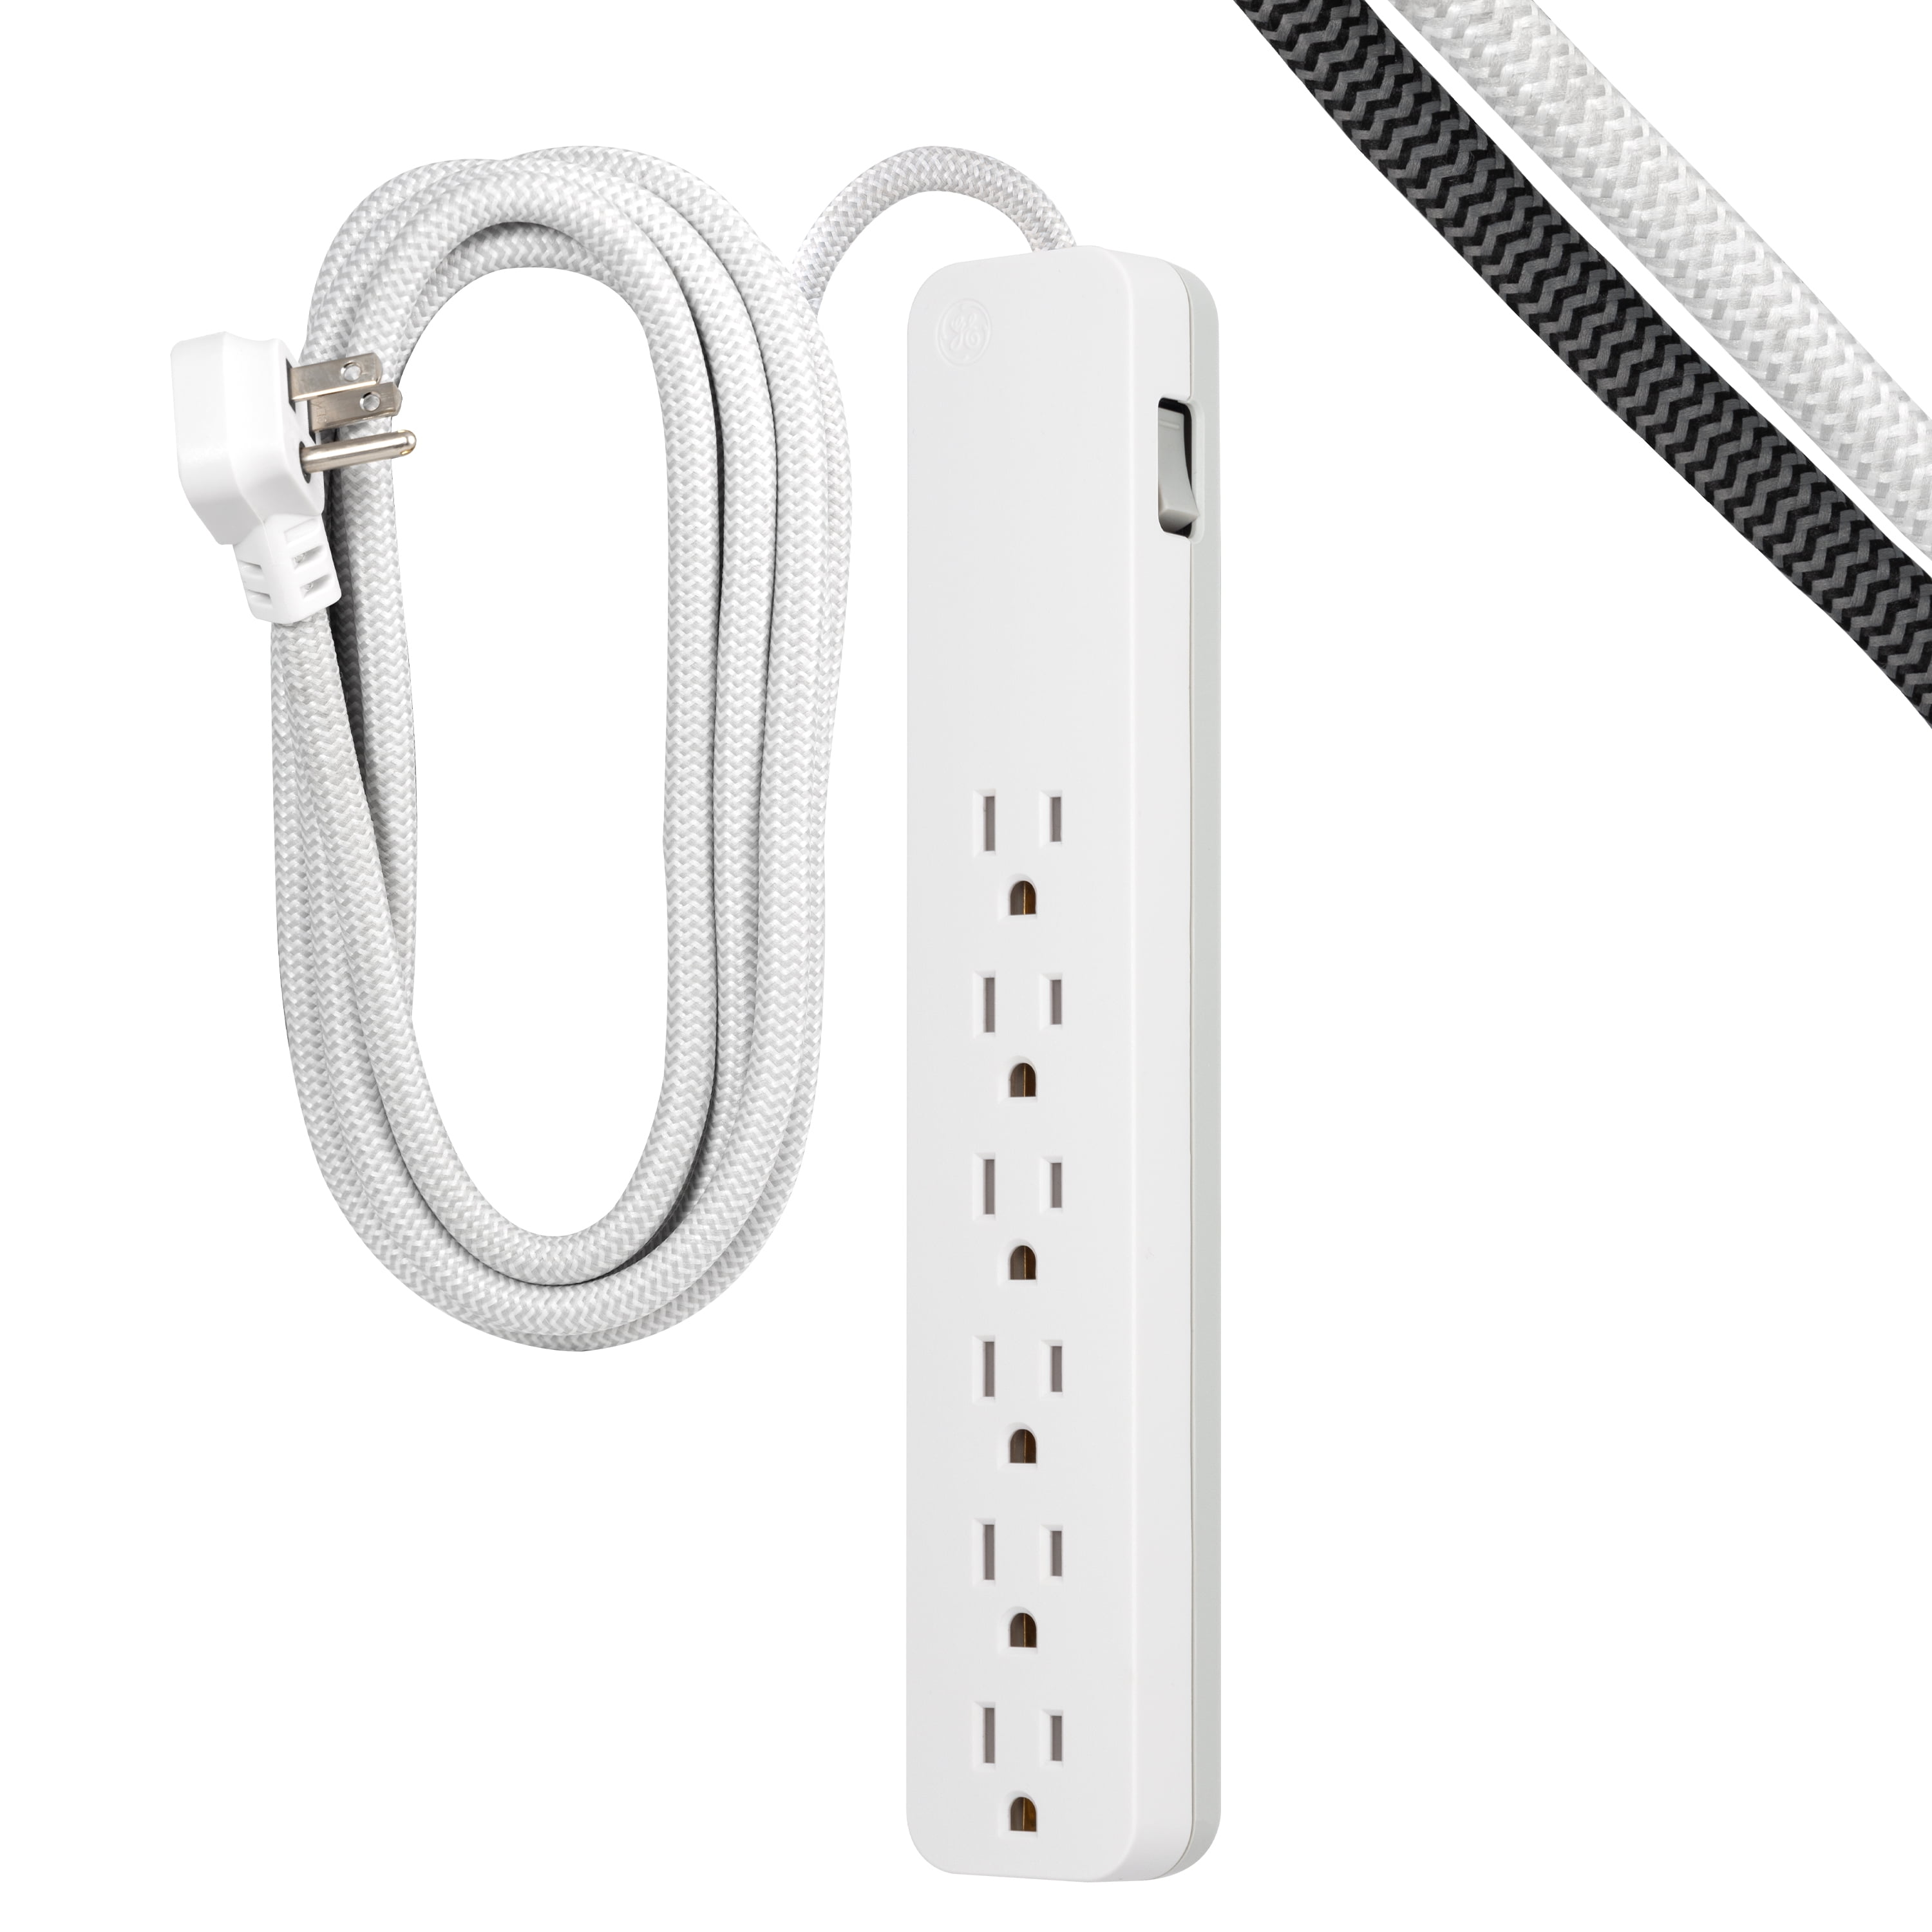 GE 6-Outlet Surge Protector, 10 Ft Extension Cord, Power Strip, 800 Joules,  Flat Plug, Twist-to-Close Safety Covers, UL Listed, White, 14092